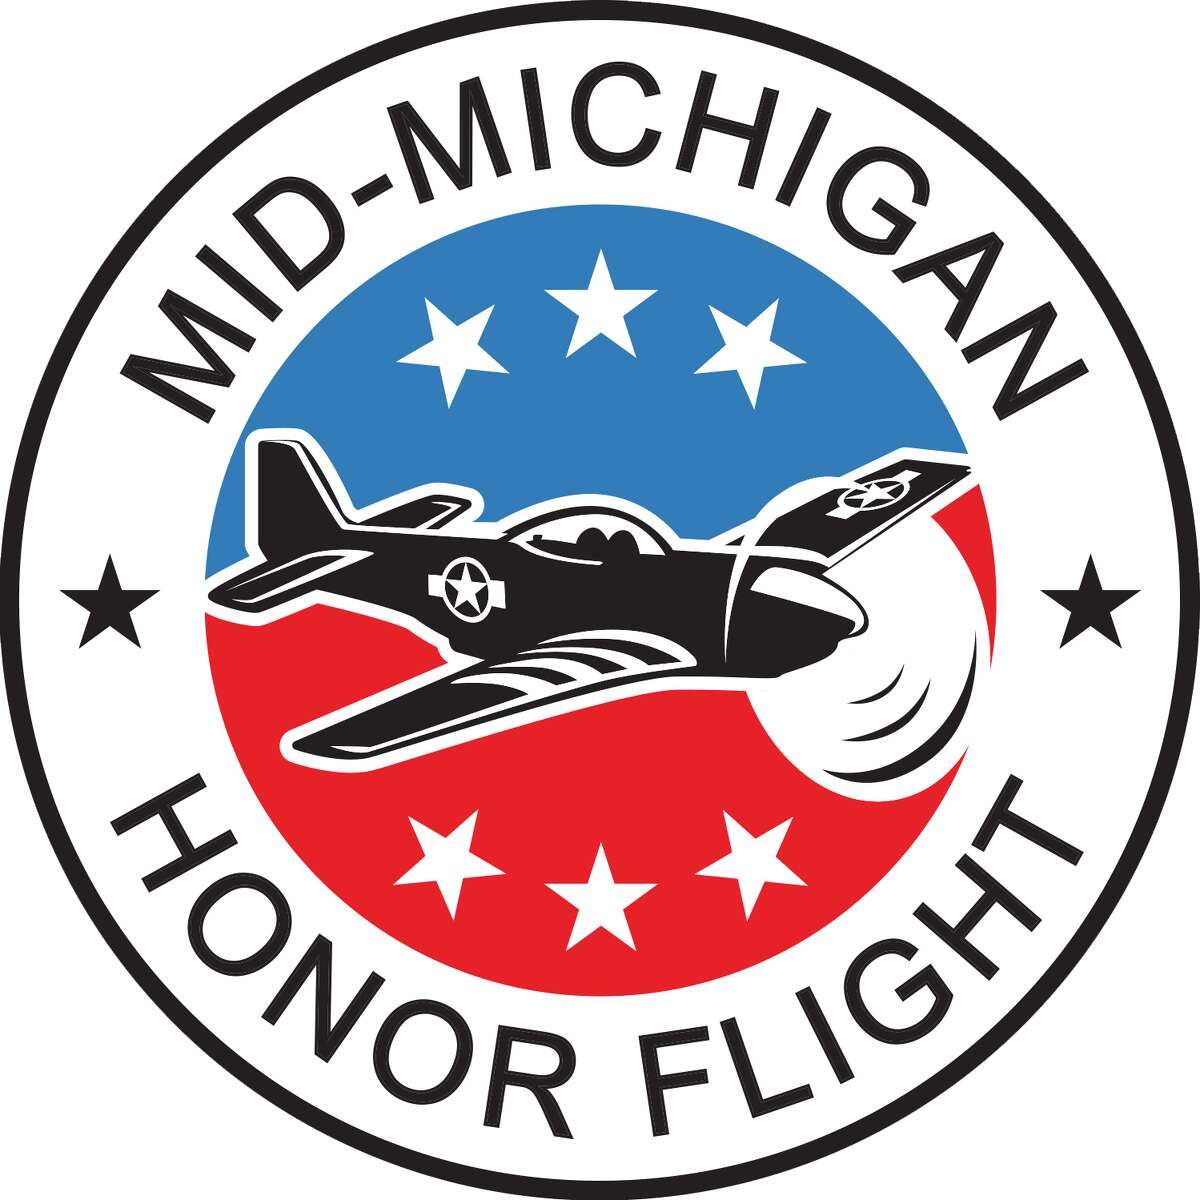 Mid-Michigan honor Flight in Mecosta was awarded a $1,000 grant from the Great Lakes Energy's Peoples Fund, which will help support this years veterans' flights to Washington D.C.